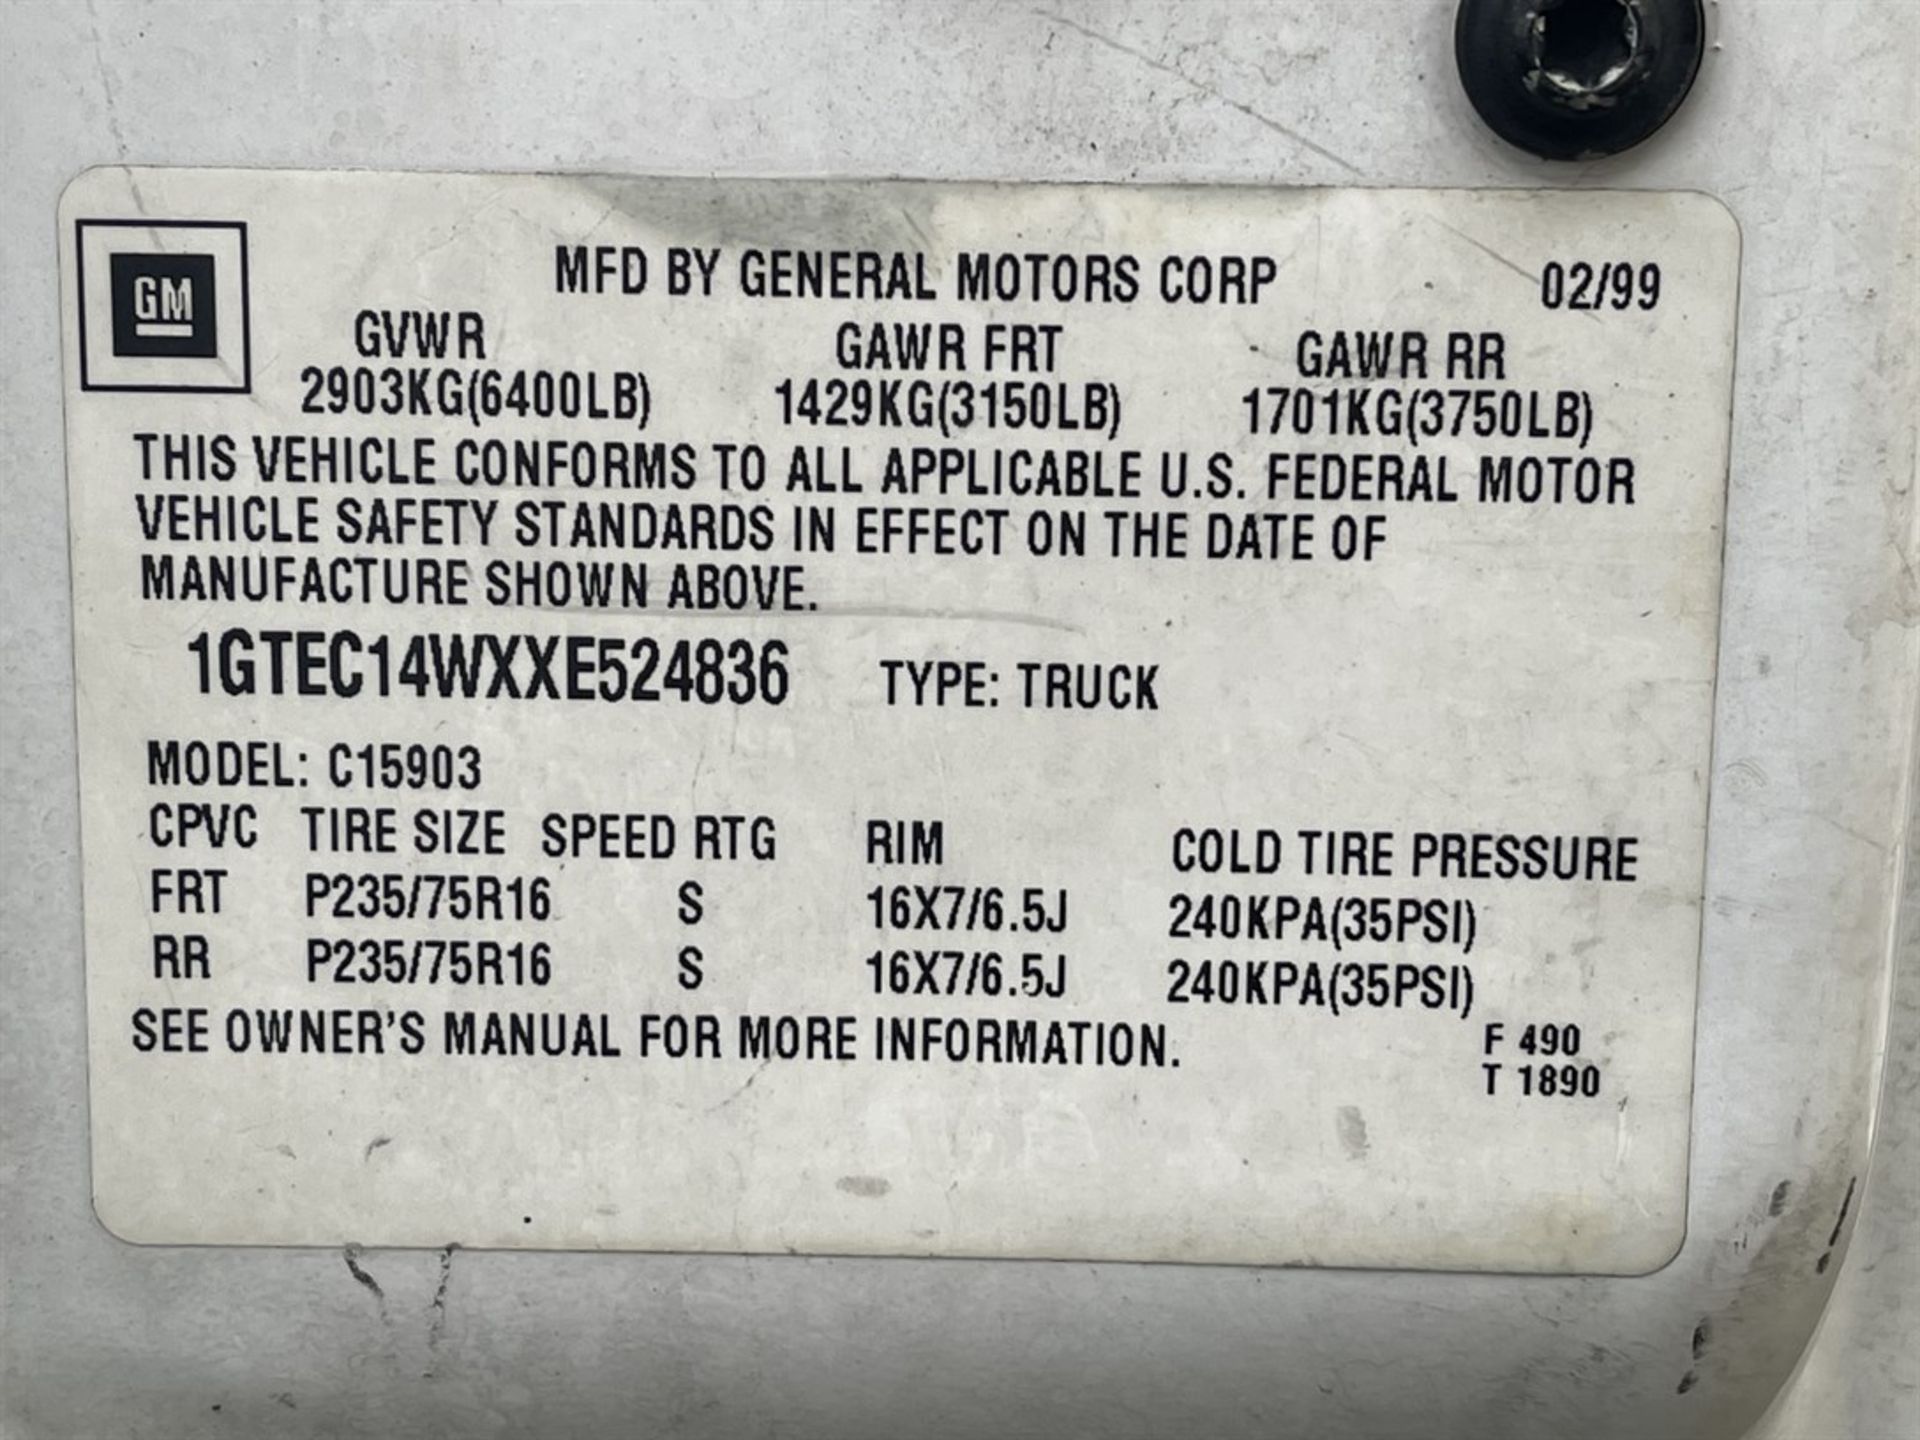 GMC 1500 Pickup Truck, VIN #1GTEC14WXXE524836, 70,036 Miles - Image 10 of 10